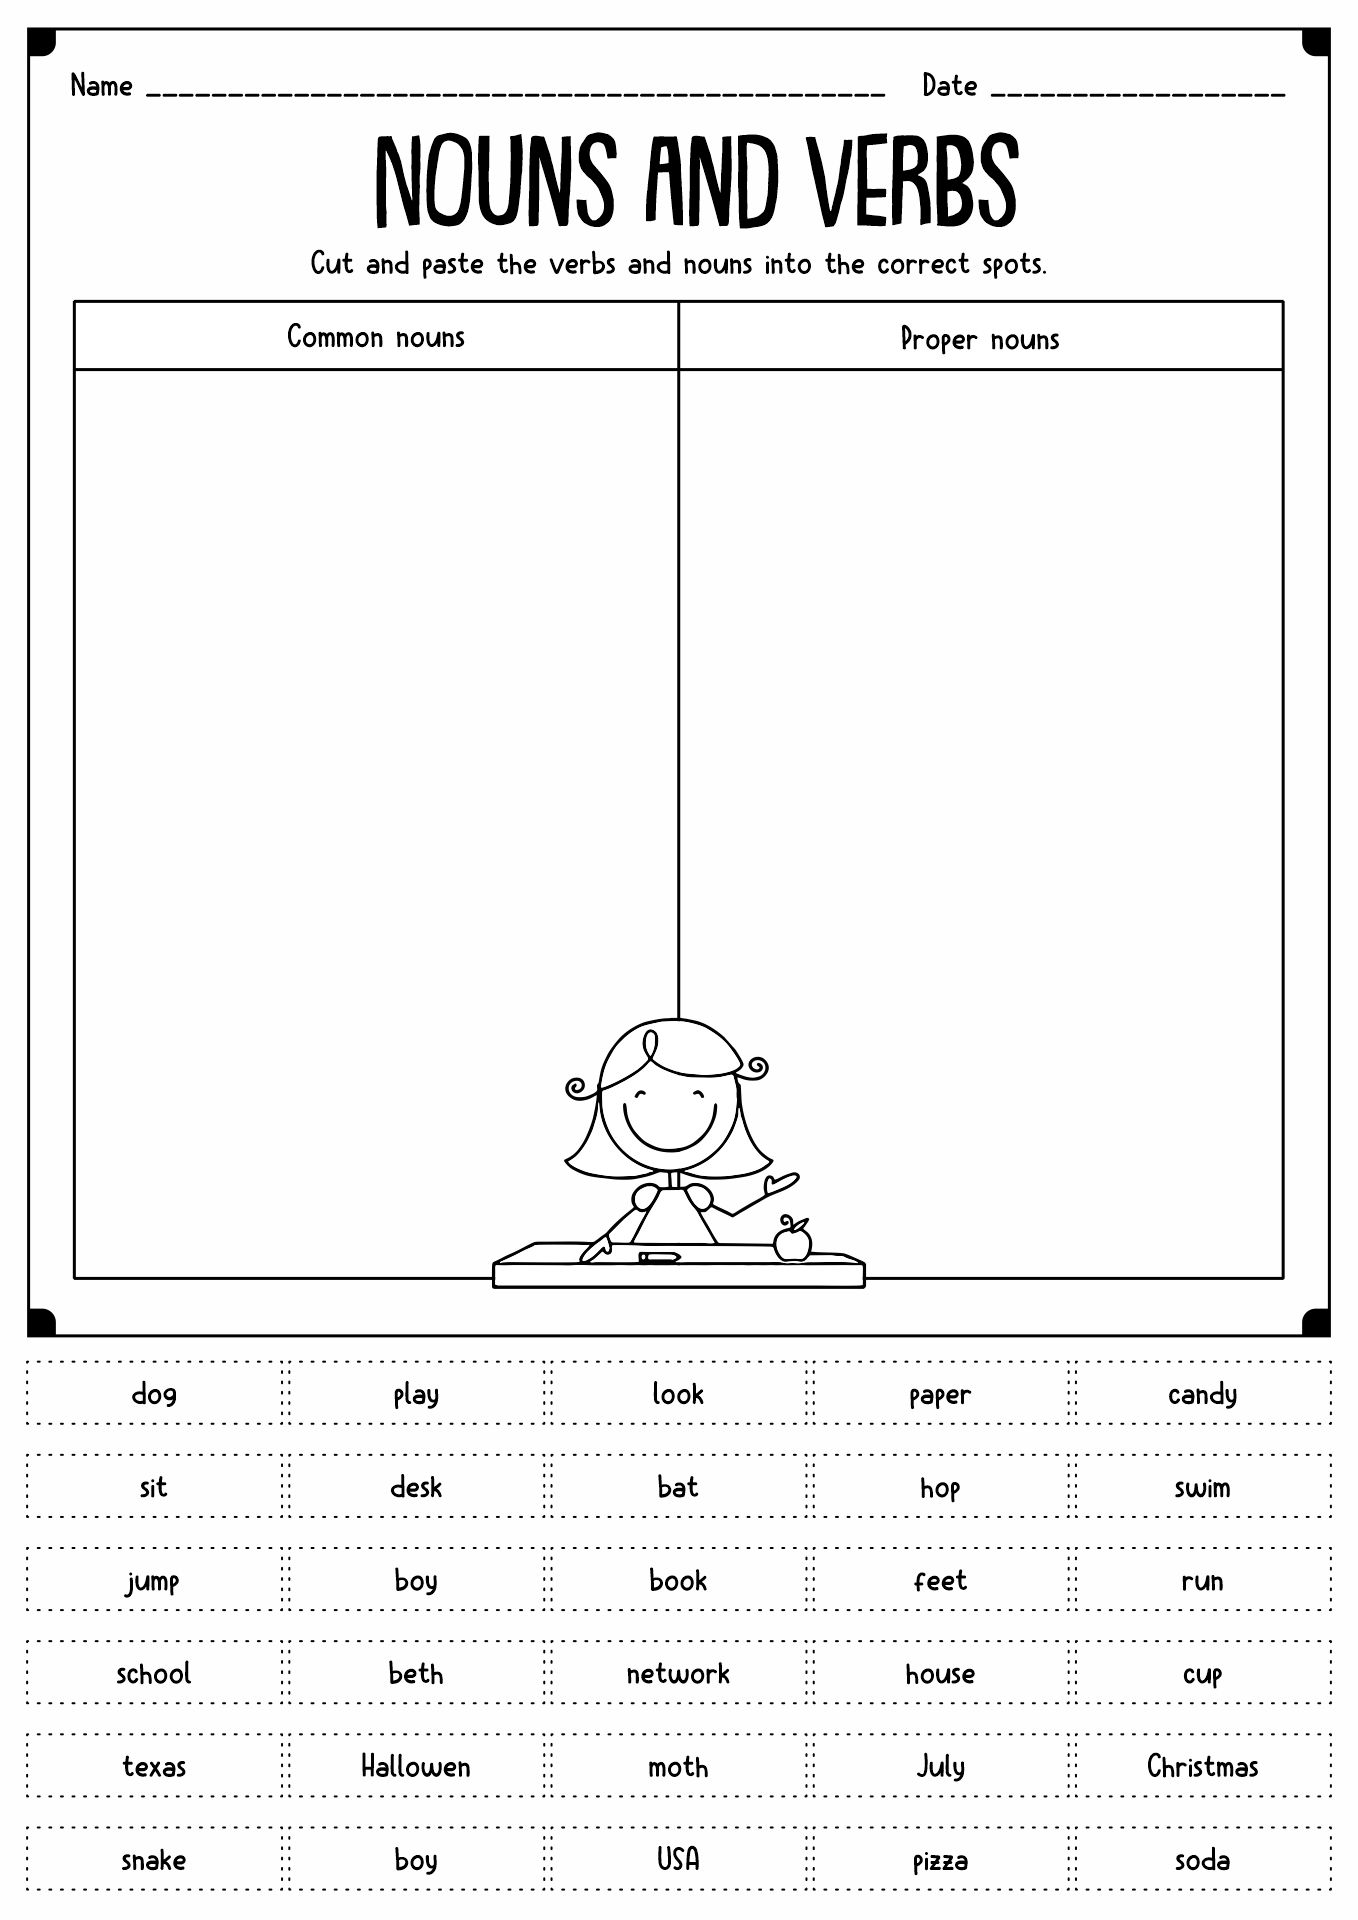 Nouns Cut and Paste Worksheets